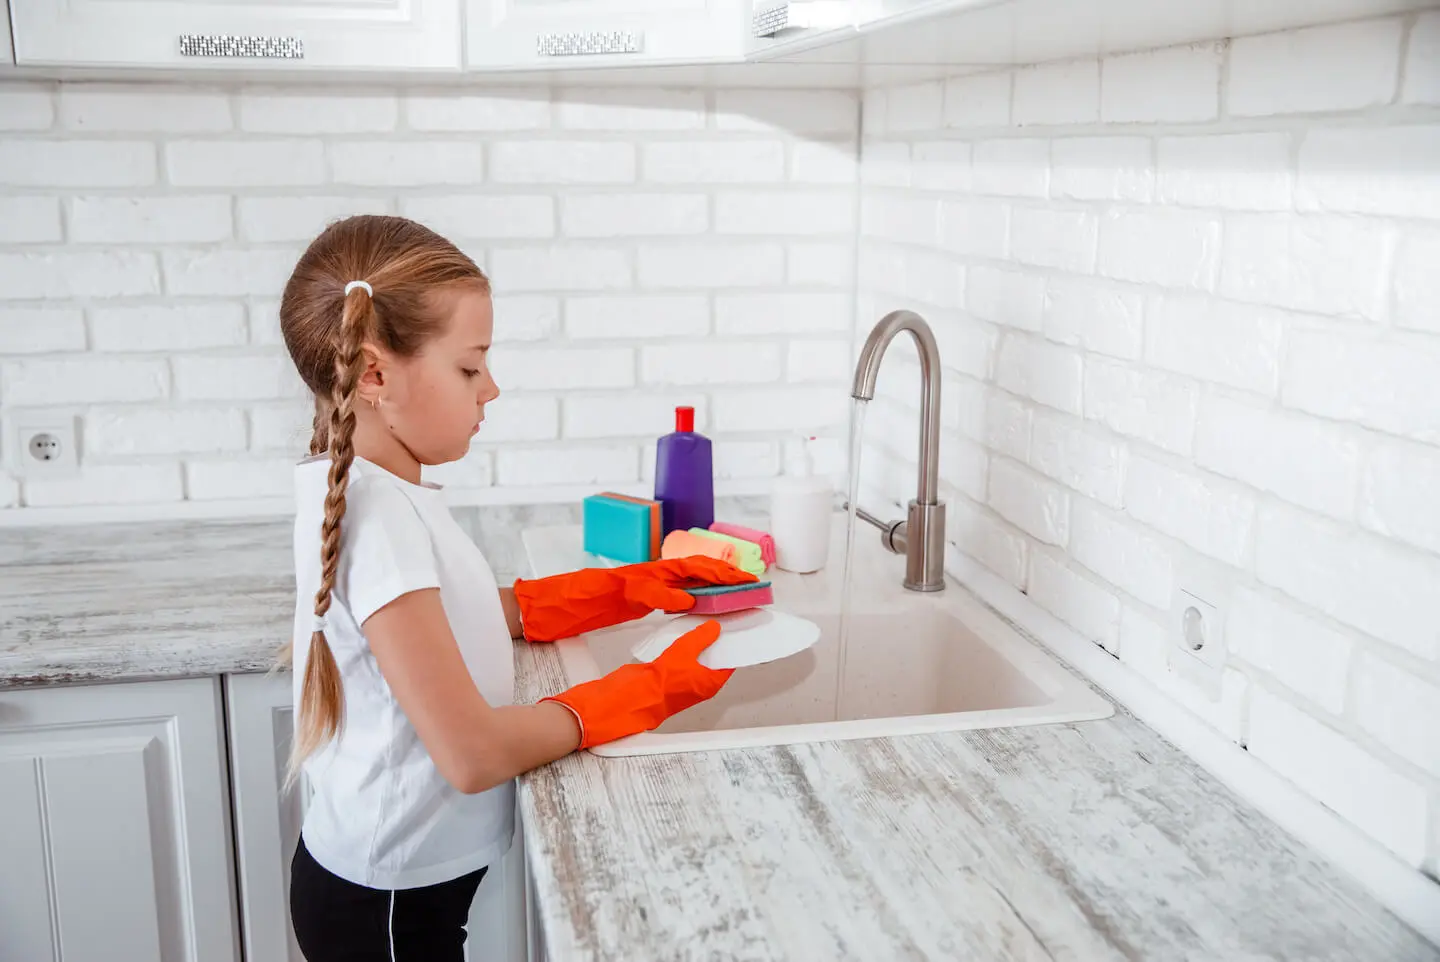 Chores for 7-year-olds: A young girl washes a dish with a sponge in the kitchen